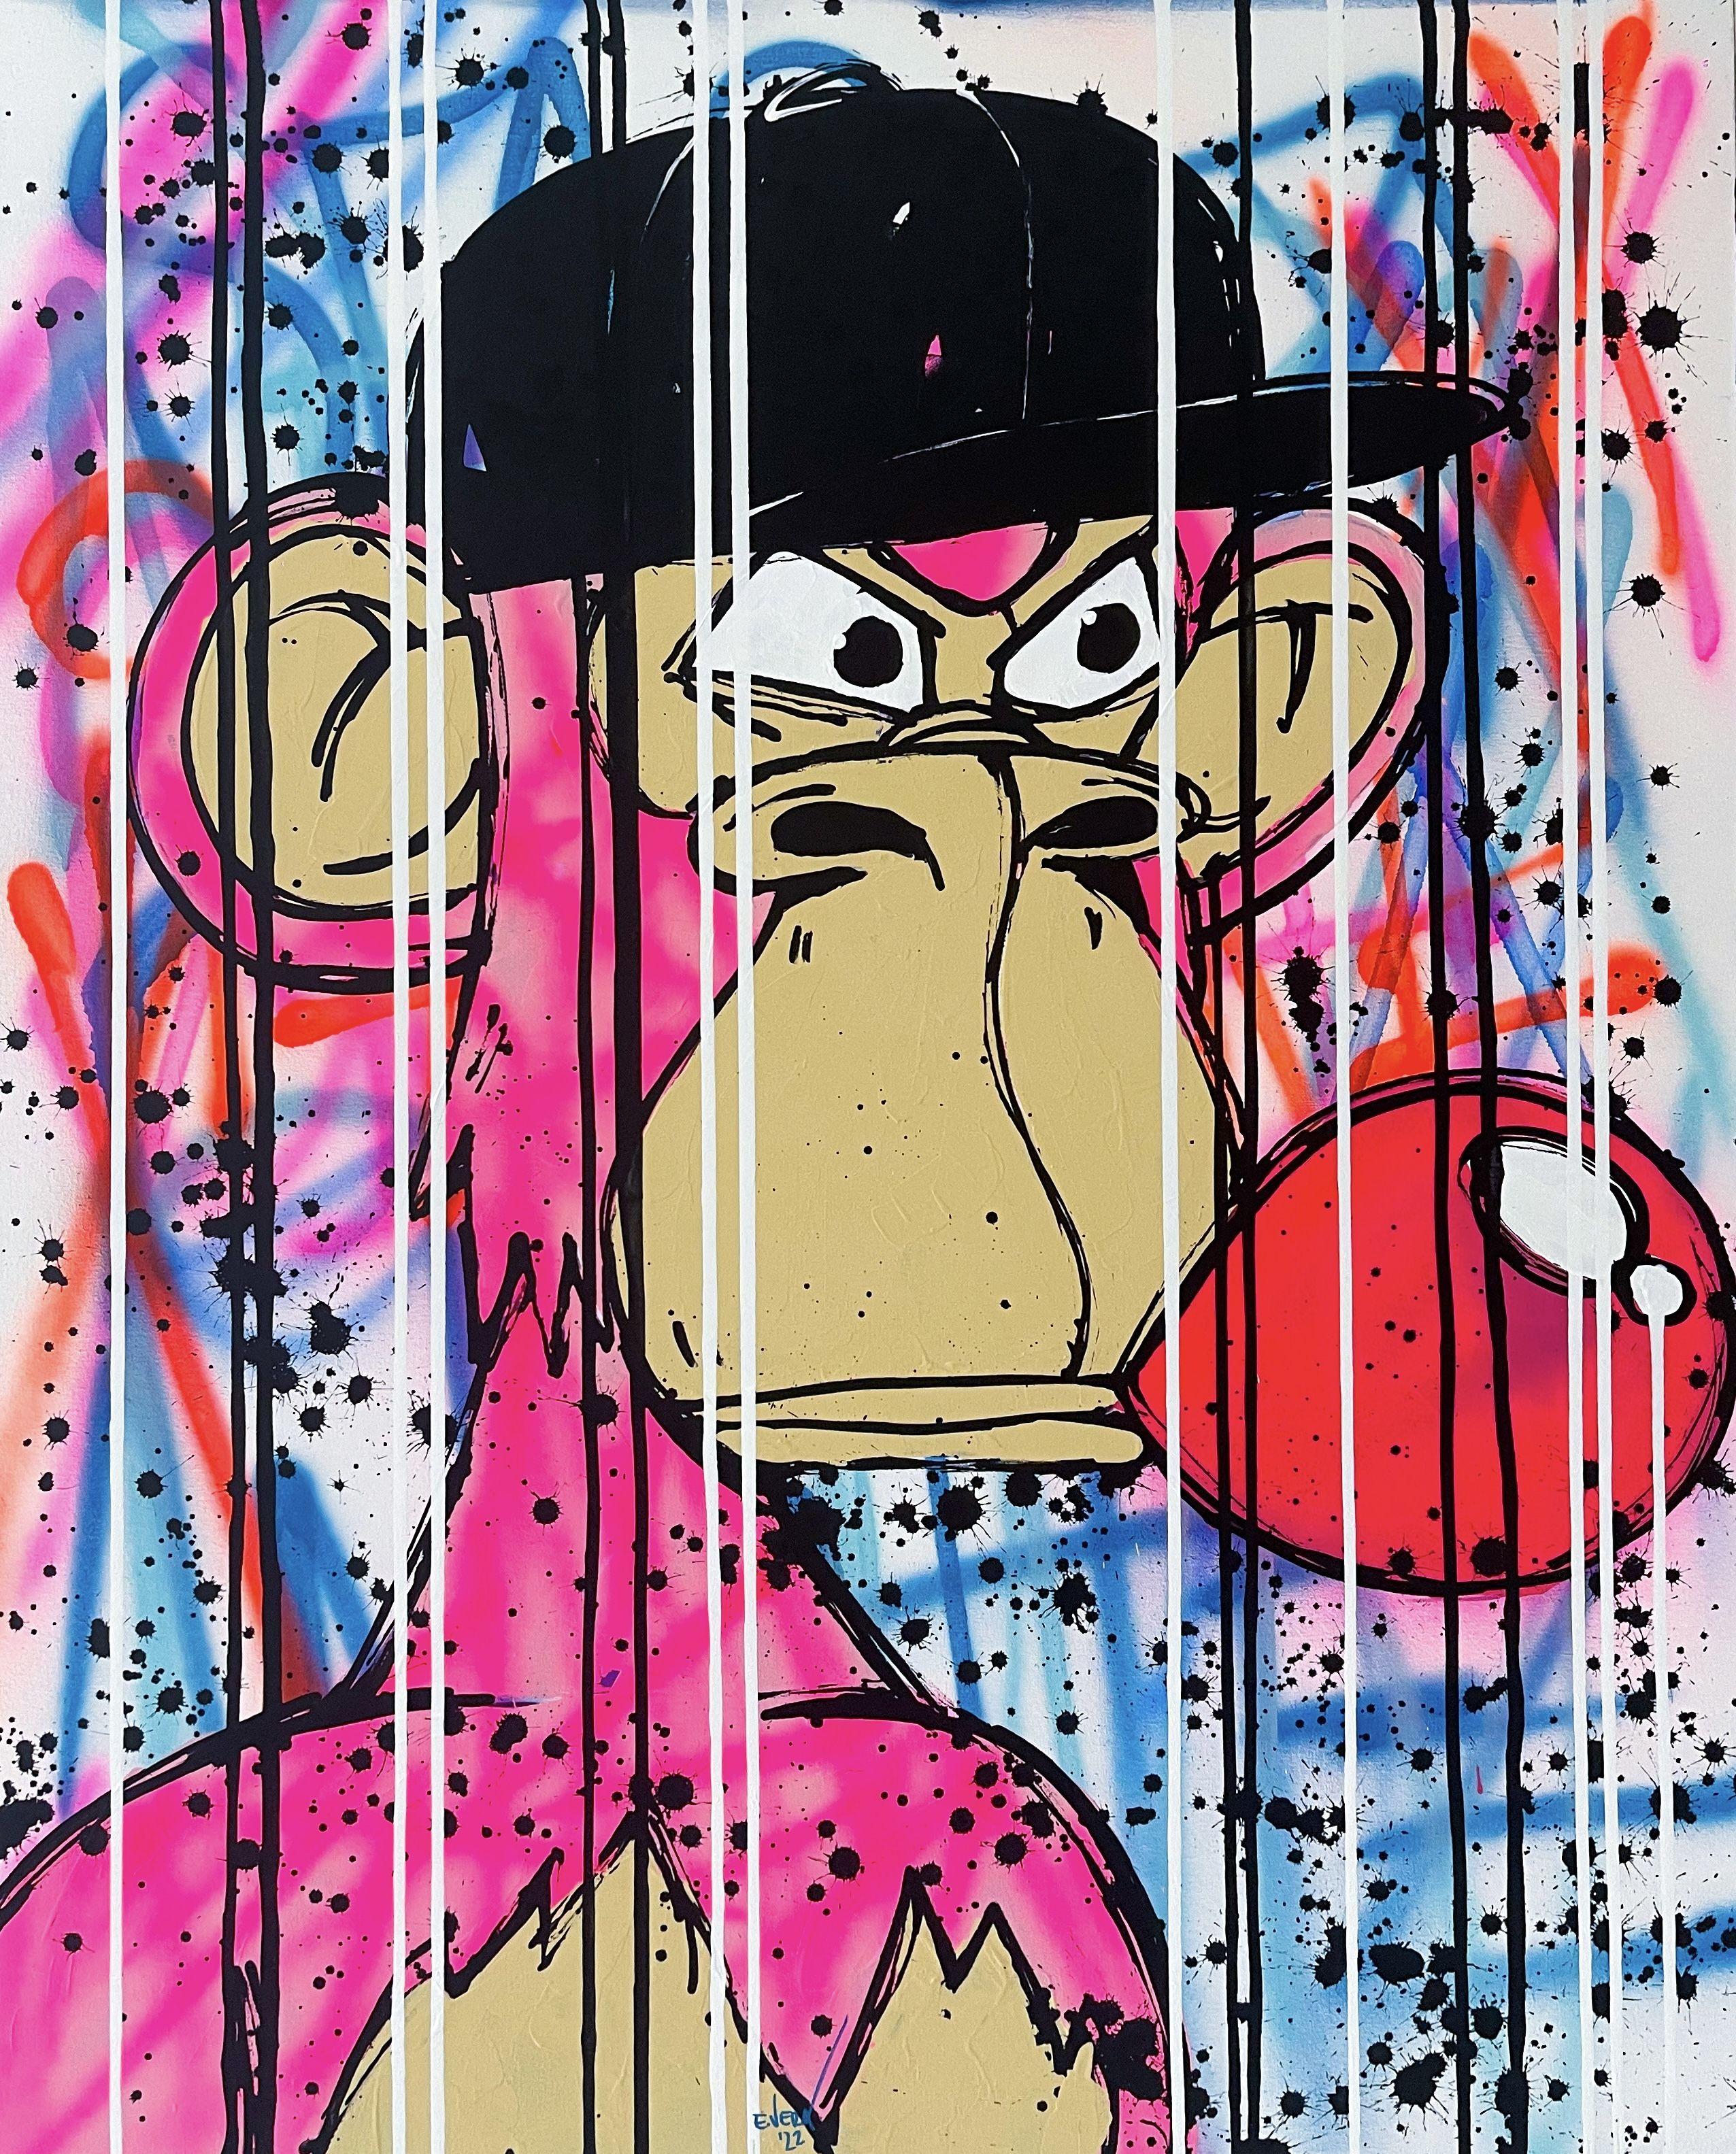 This new series is in attribute to the "Bored Apes". They're very famous characters in the digital art market (NFTs). This series focuses on the different facets, colors and details of these spectacular characters. The titles of these artworks will